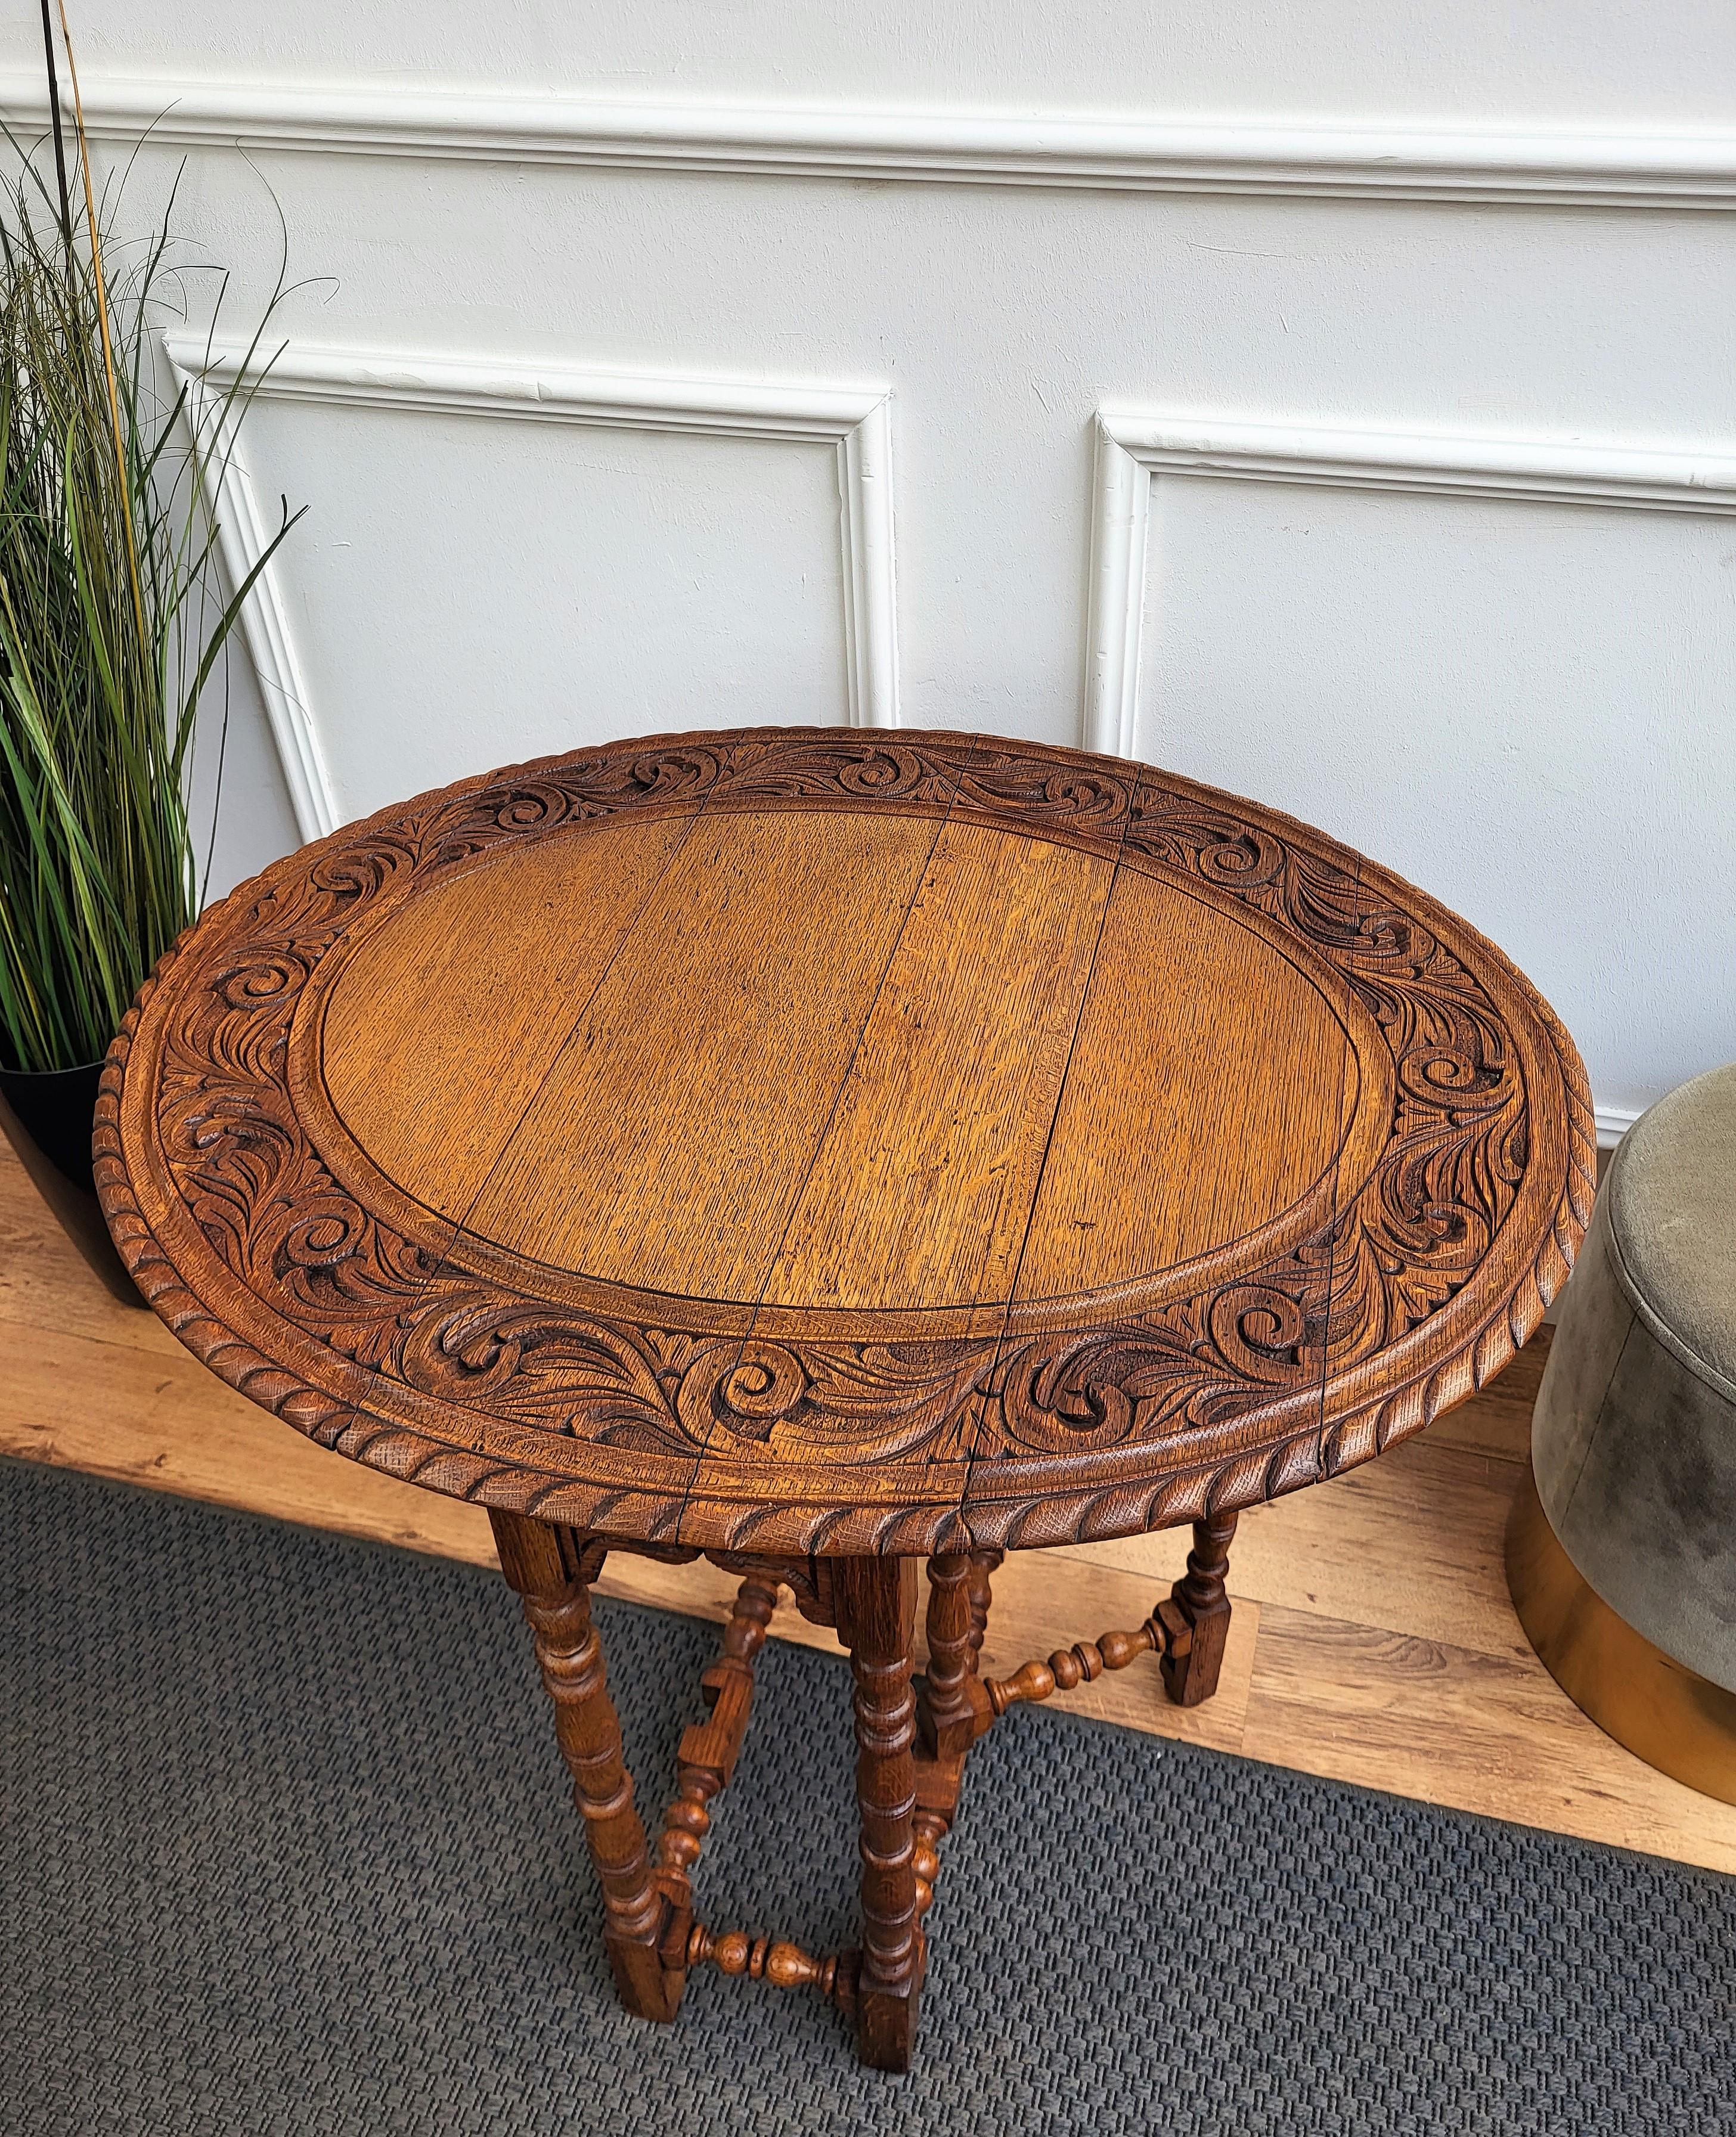 A small Italian drop leaf top with curved corners upon bobbin barley turned legs on all four sides and the gates. The table also features an oval table top with carved decorations and beveled edges, pear shaped feet, and a lower box stretcher for